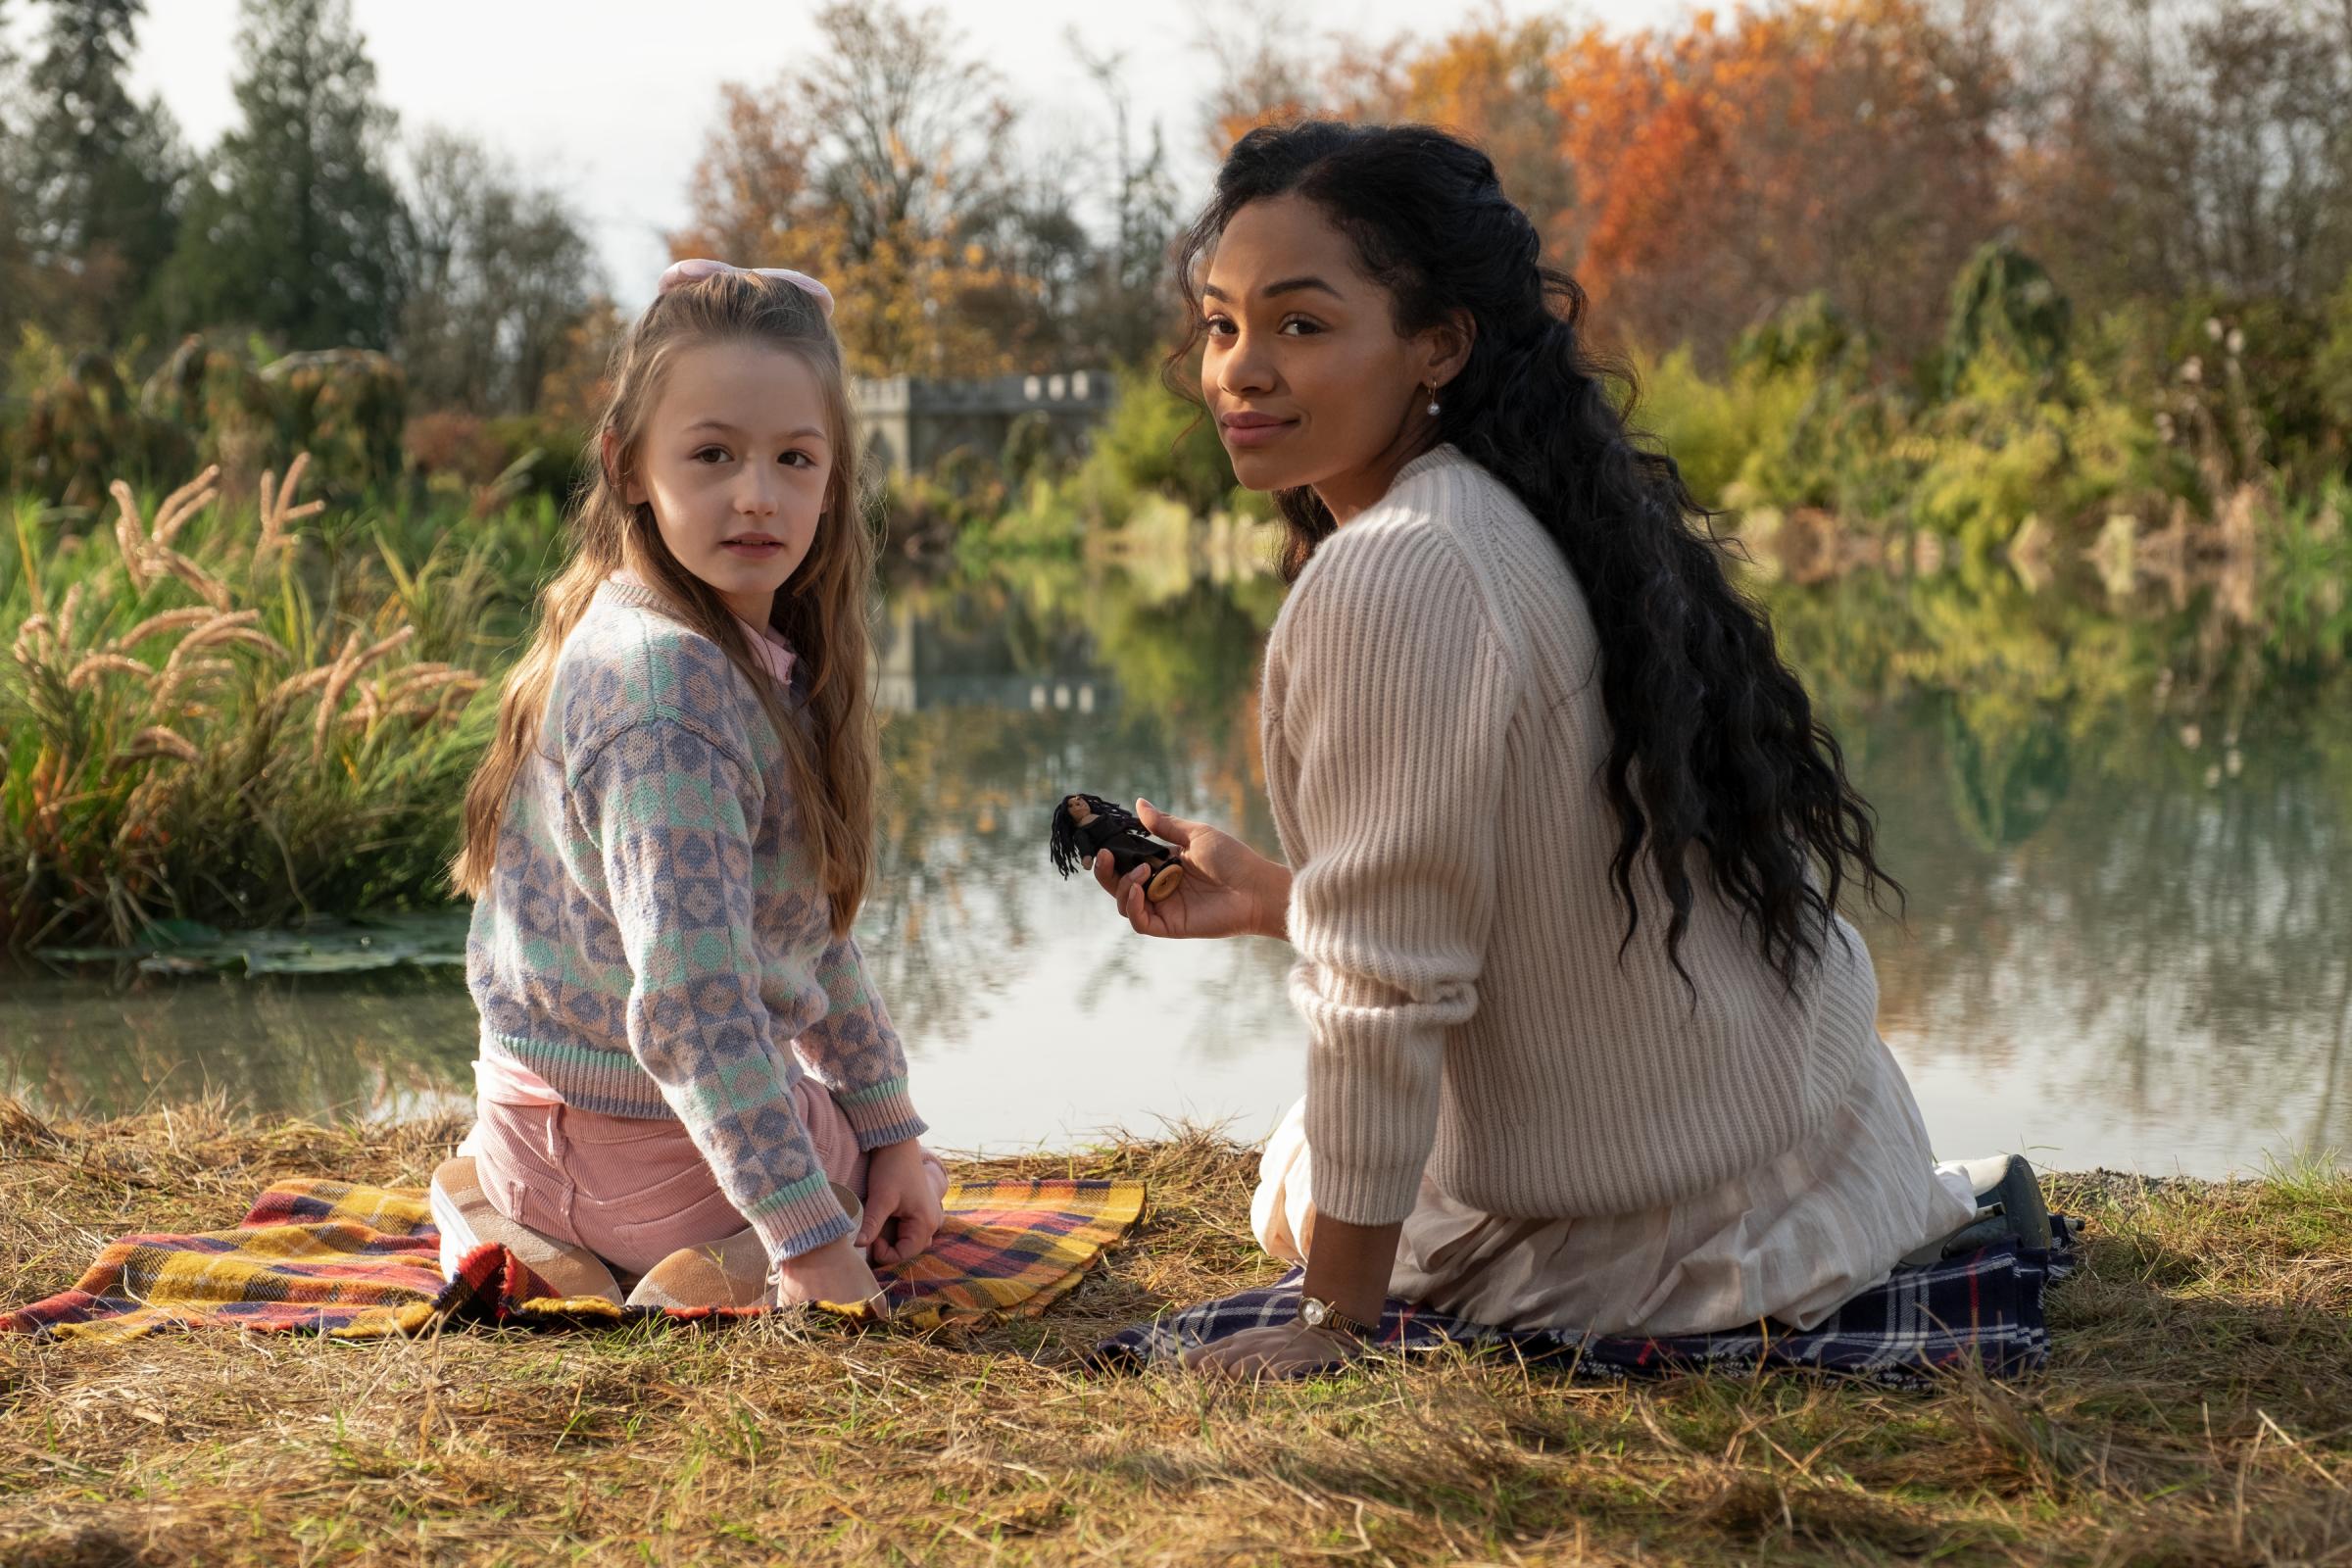 THE HAUNTING OF BLY MANOR (L to R) AMELIE SMITH as FLORA and TAHIRAH SHARIF as REBECCA JESSEL in THE HAUNTING OF BLY MANOR Cr. EIKE SCHROTER/NETFLIX © 2020